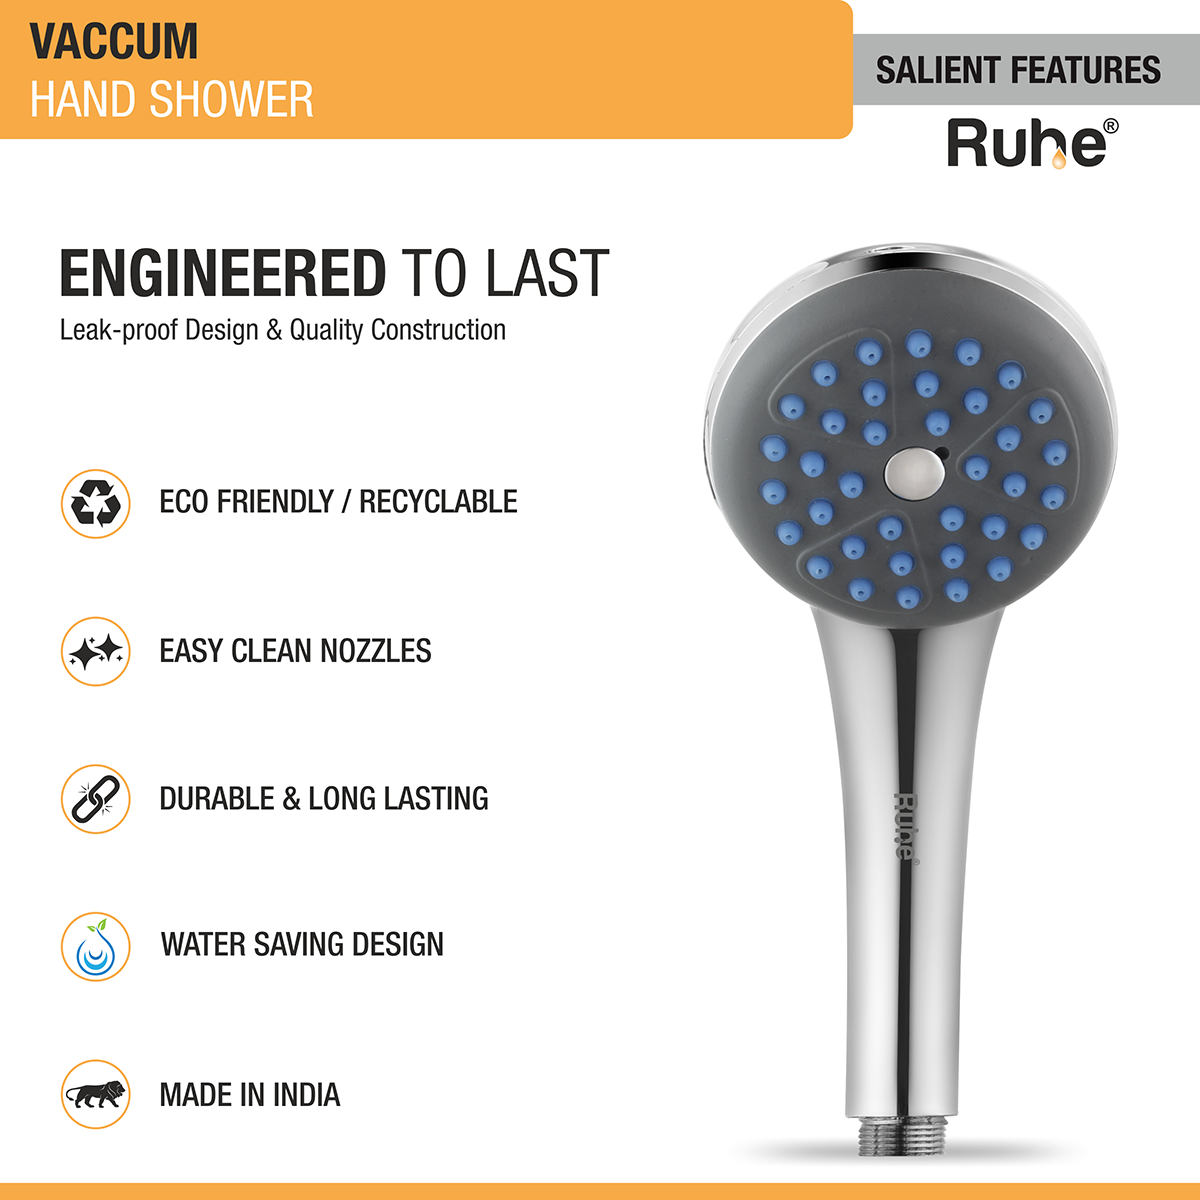 Vaccum Hand Shower (Only Showerhead) features